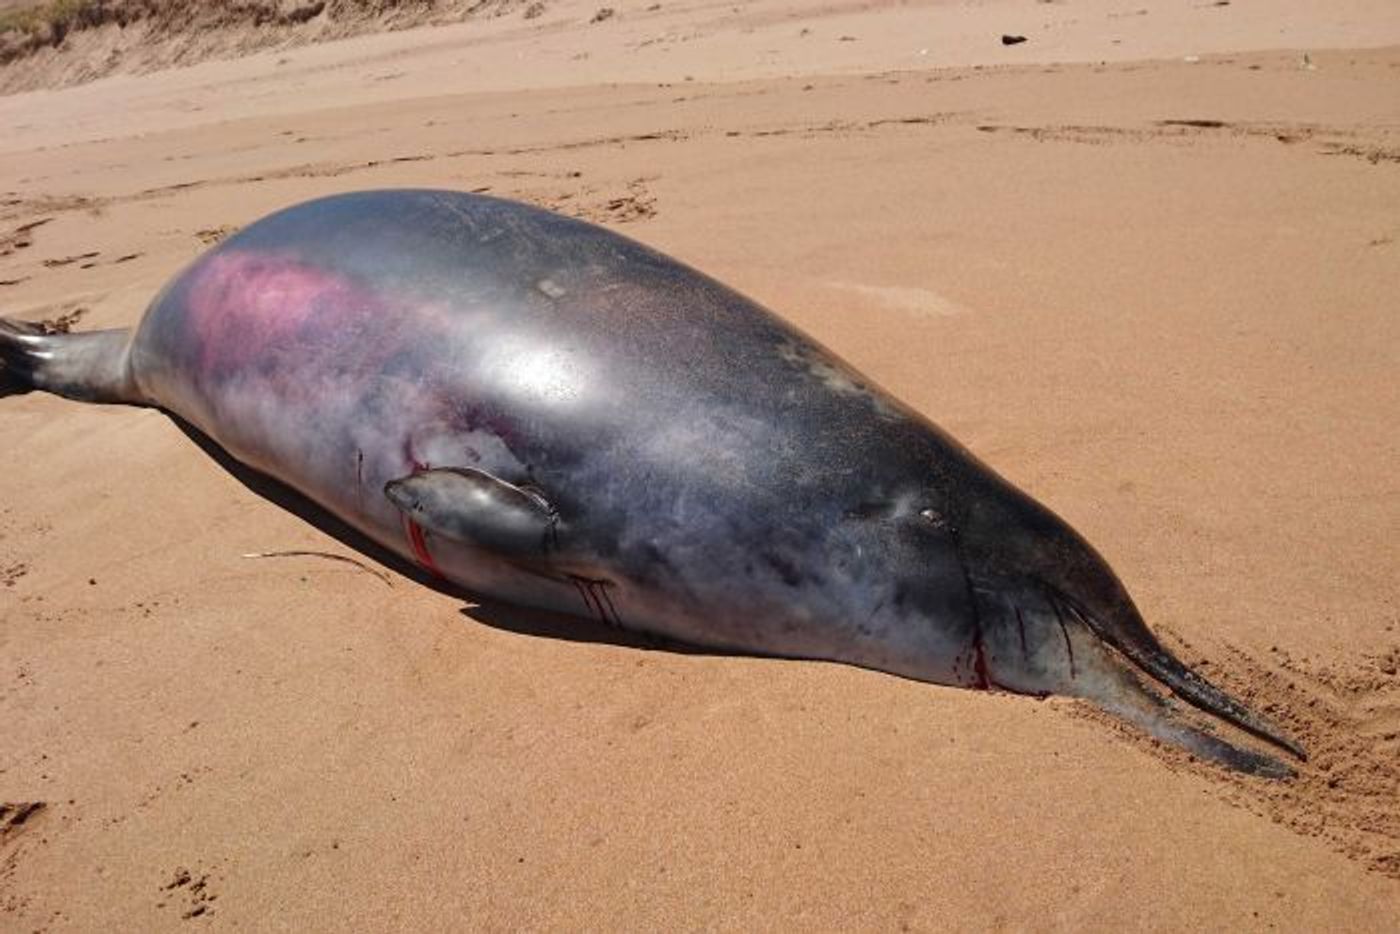 A beached beaked whale in Australia earlier this year has led to an important discovery.